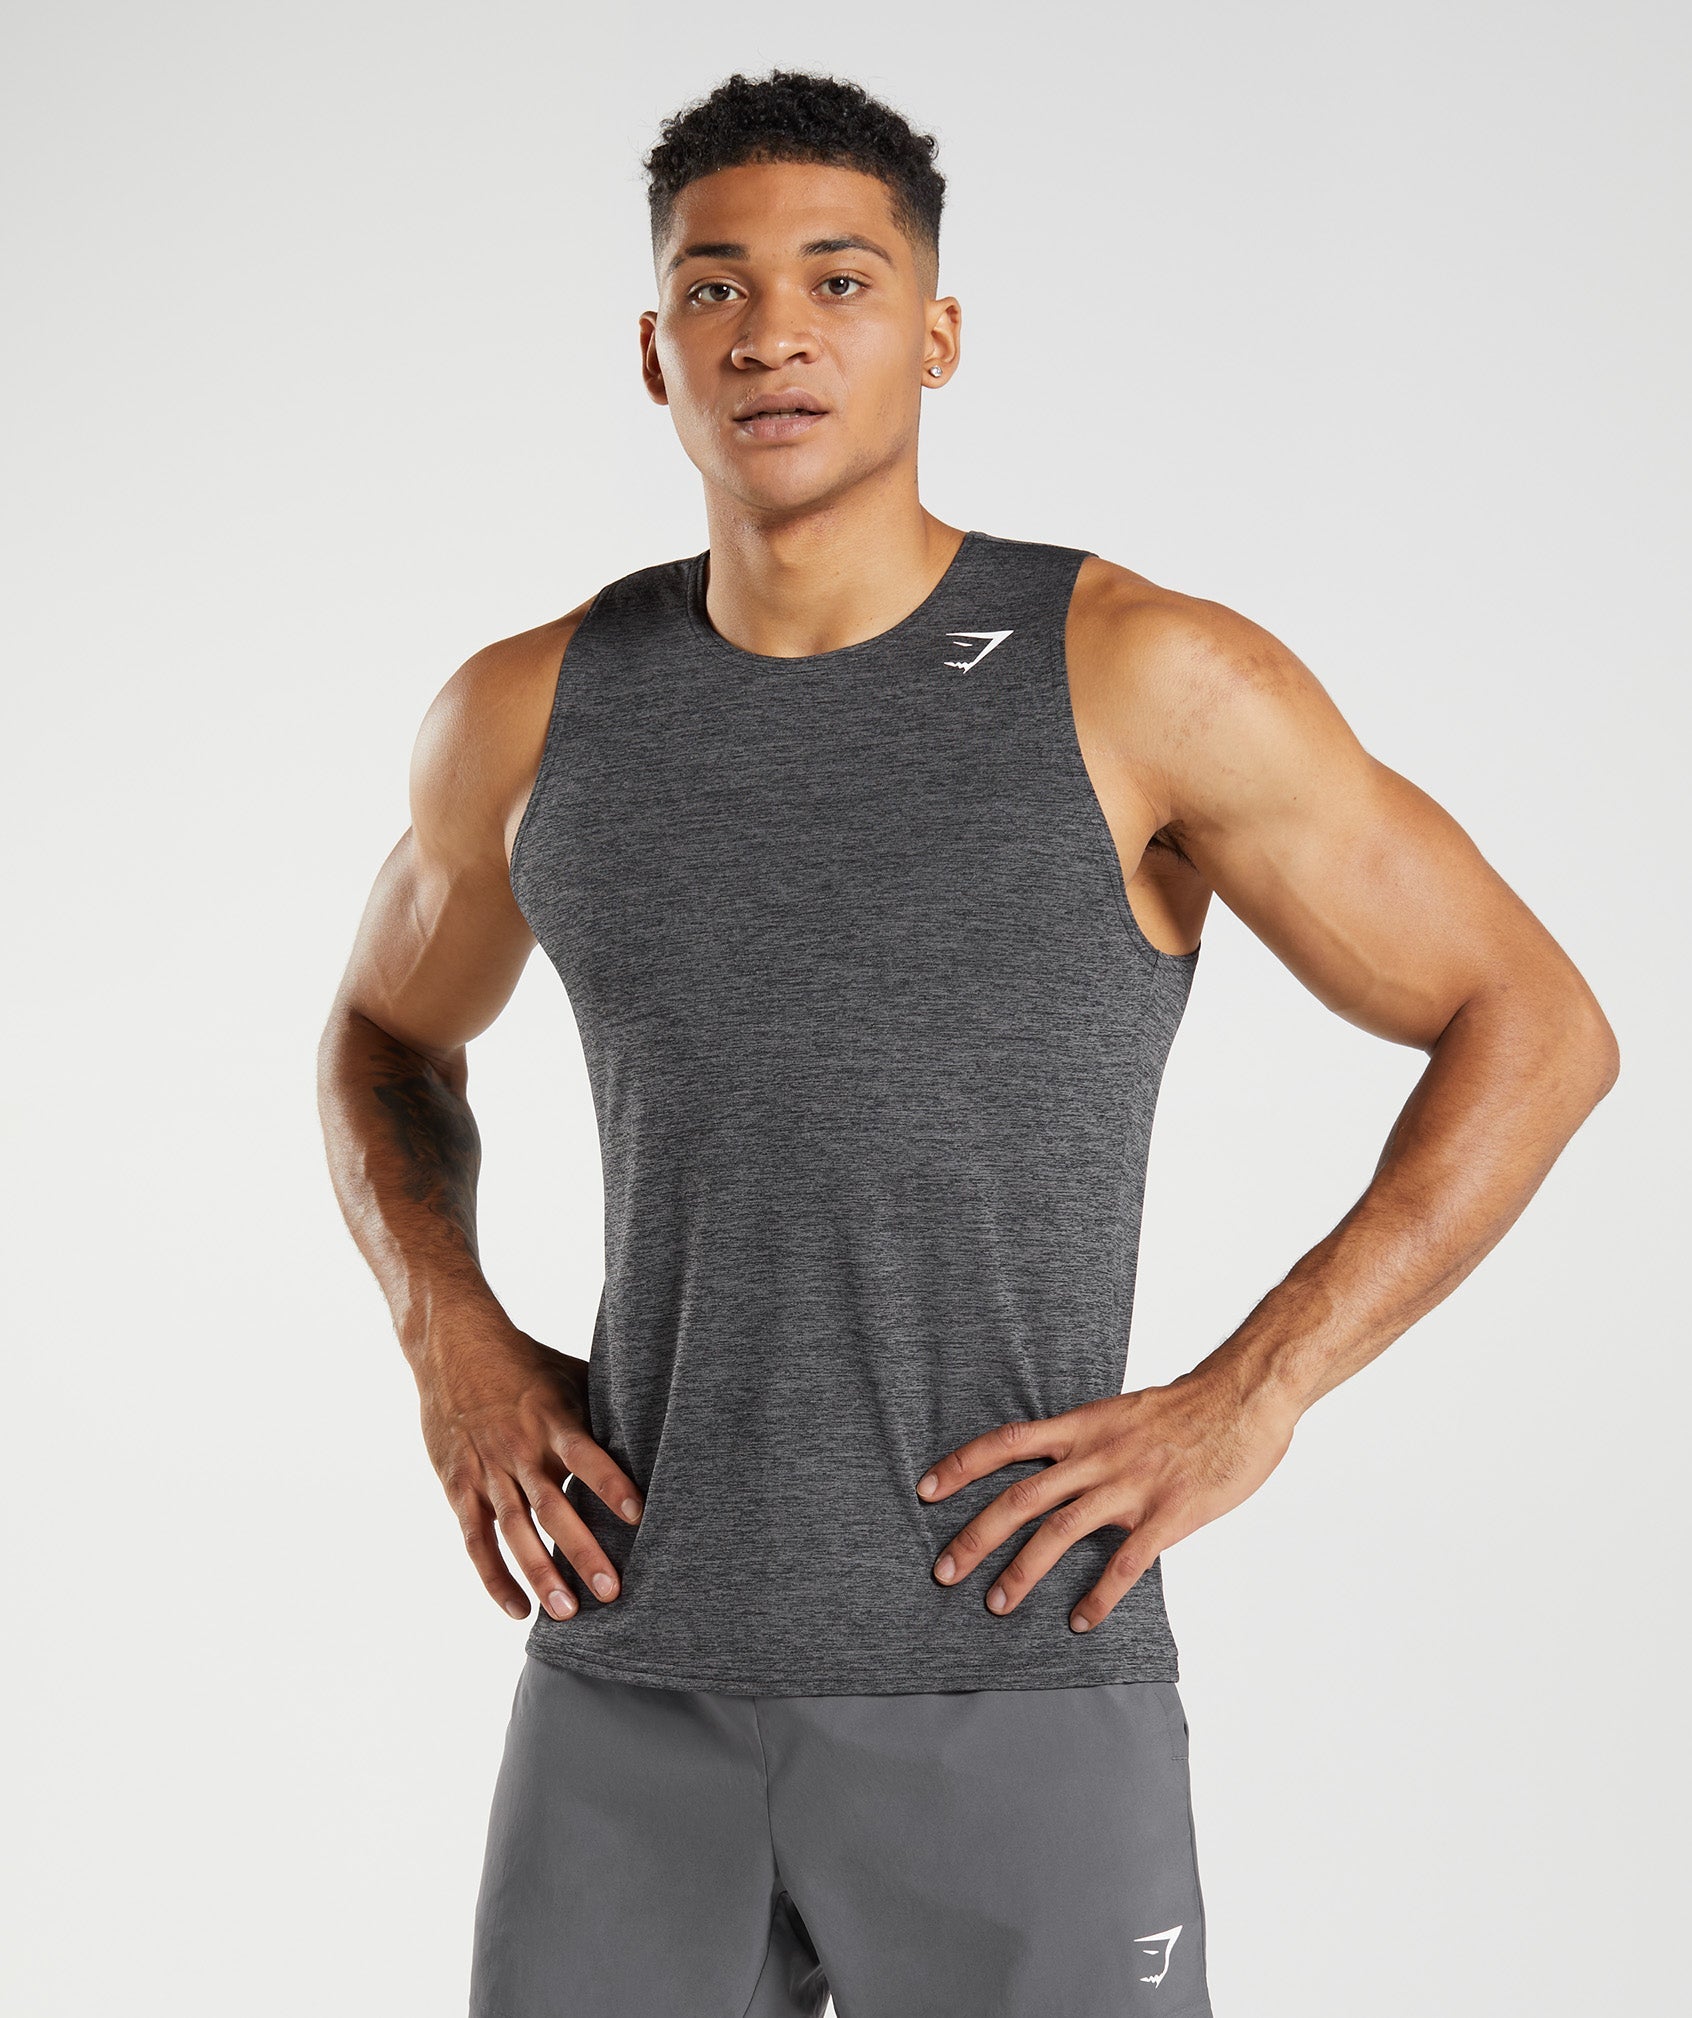 Arrival Marl Tank in Black/Silhouette Grey Marl is out of stock